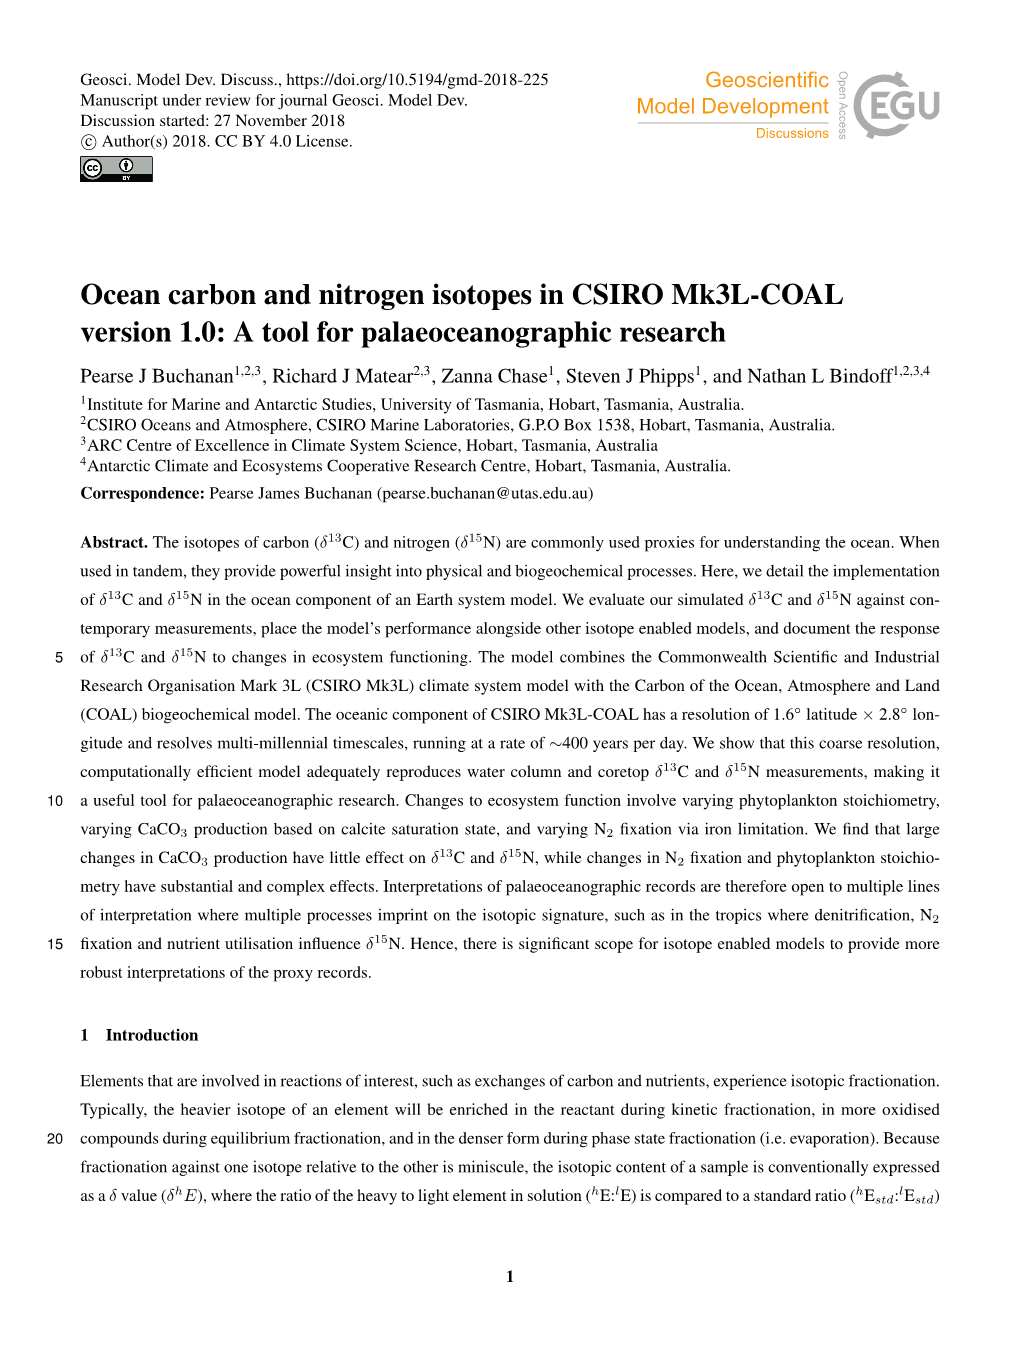 Ocean Carbon and Nitrogen Isotopes in CSIRO Mk3l-COAL